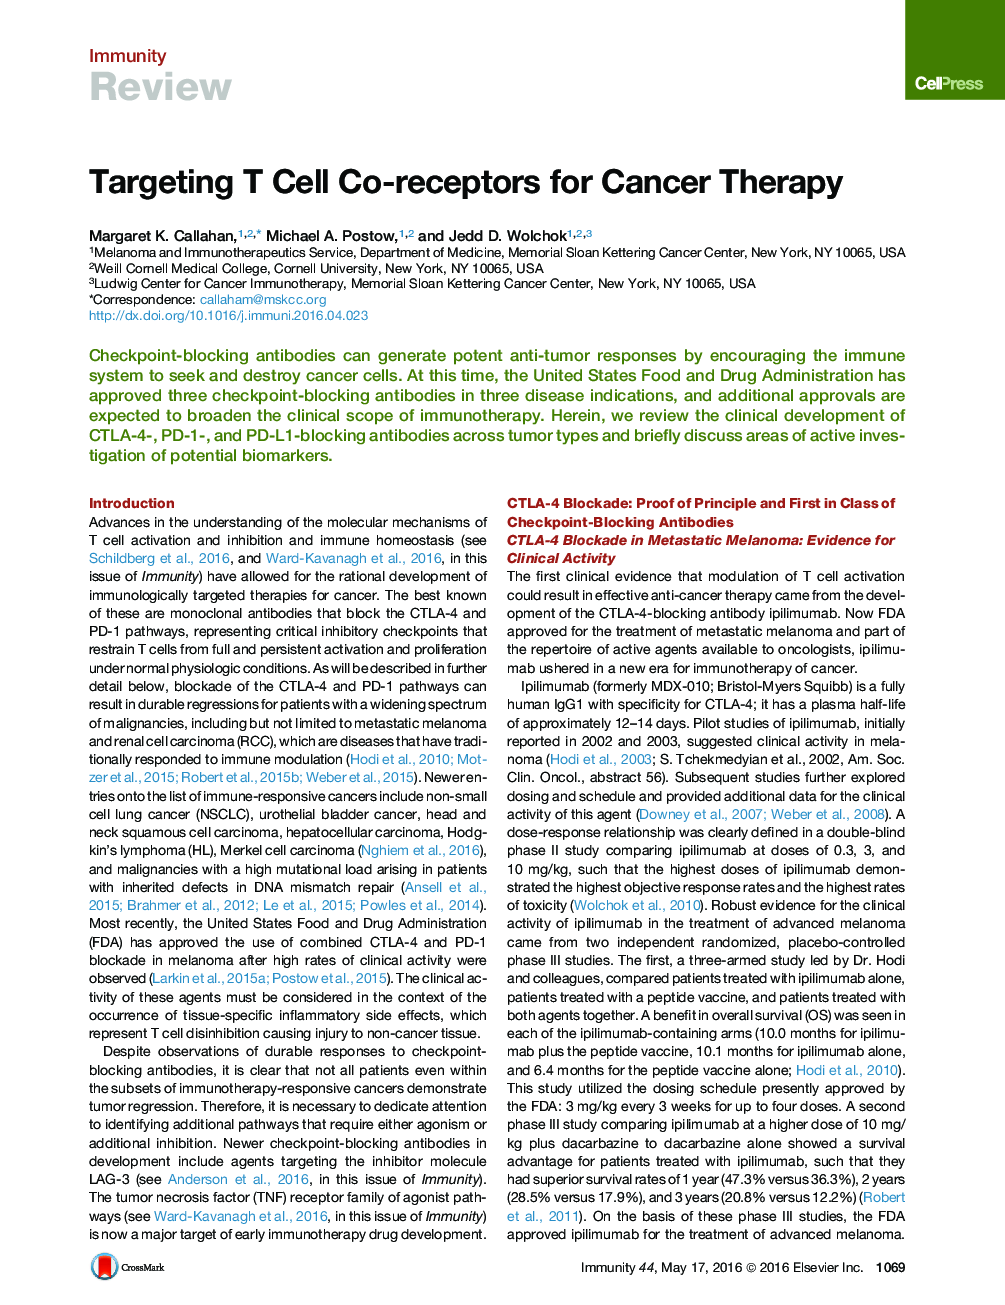 Targeting T Cell Co-receptors for Cancer Therapy